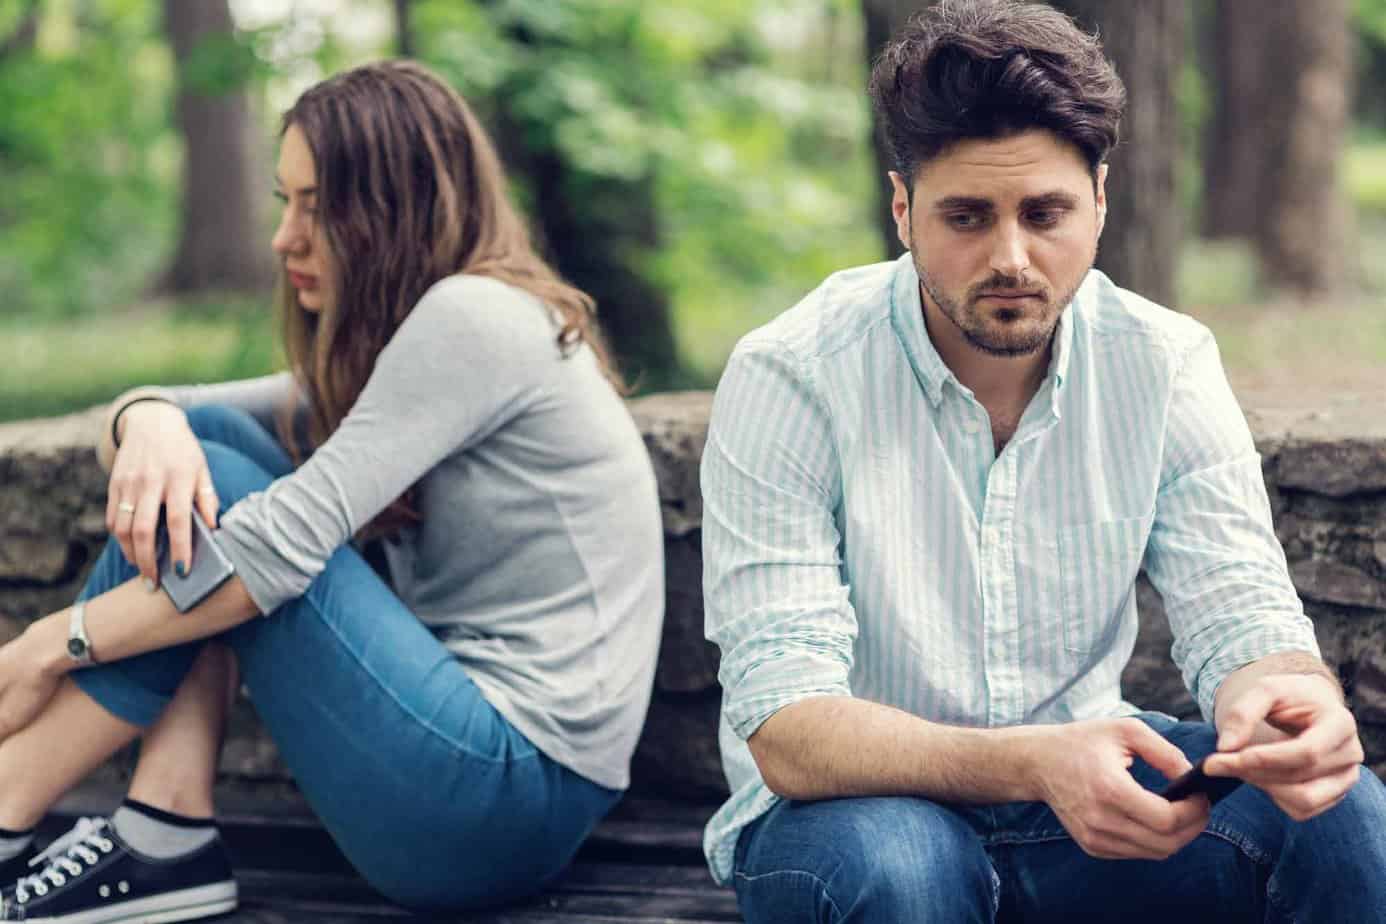 Man and woman sad outside by trees looking away from eachother emotionally distanced